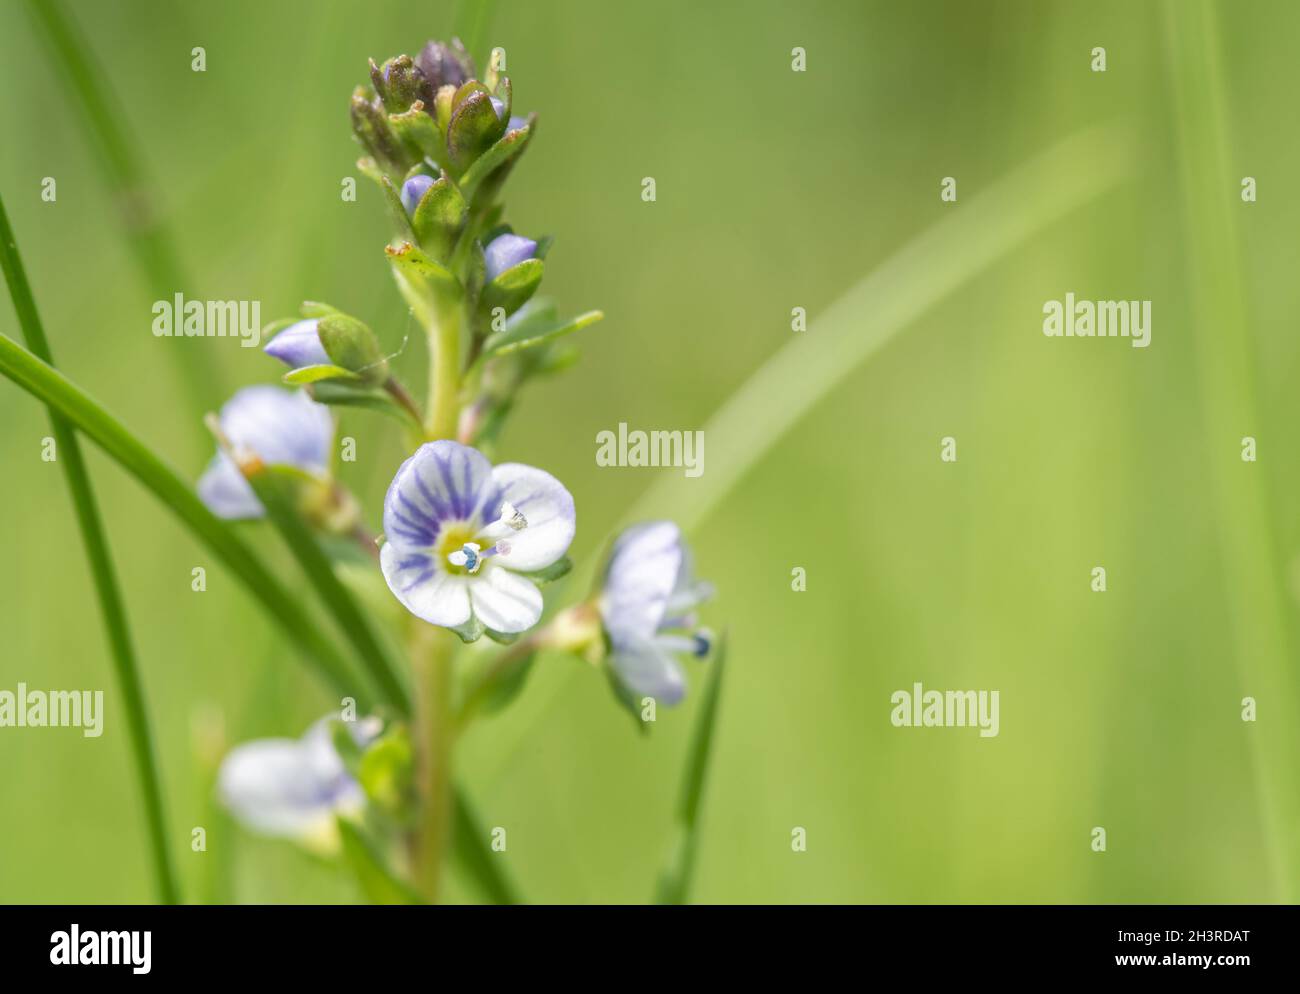 Thyme blossom Stock Photo